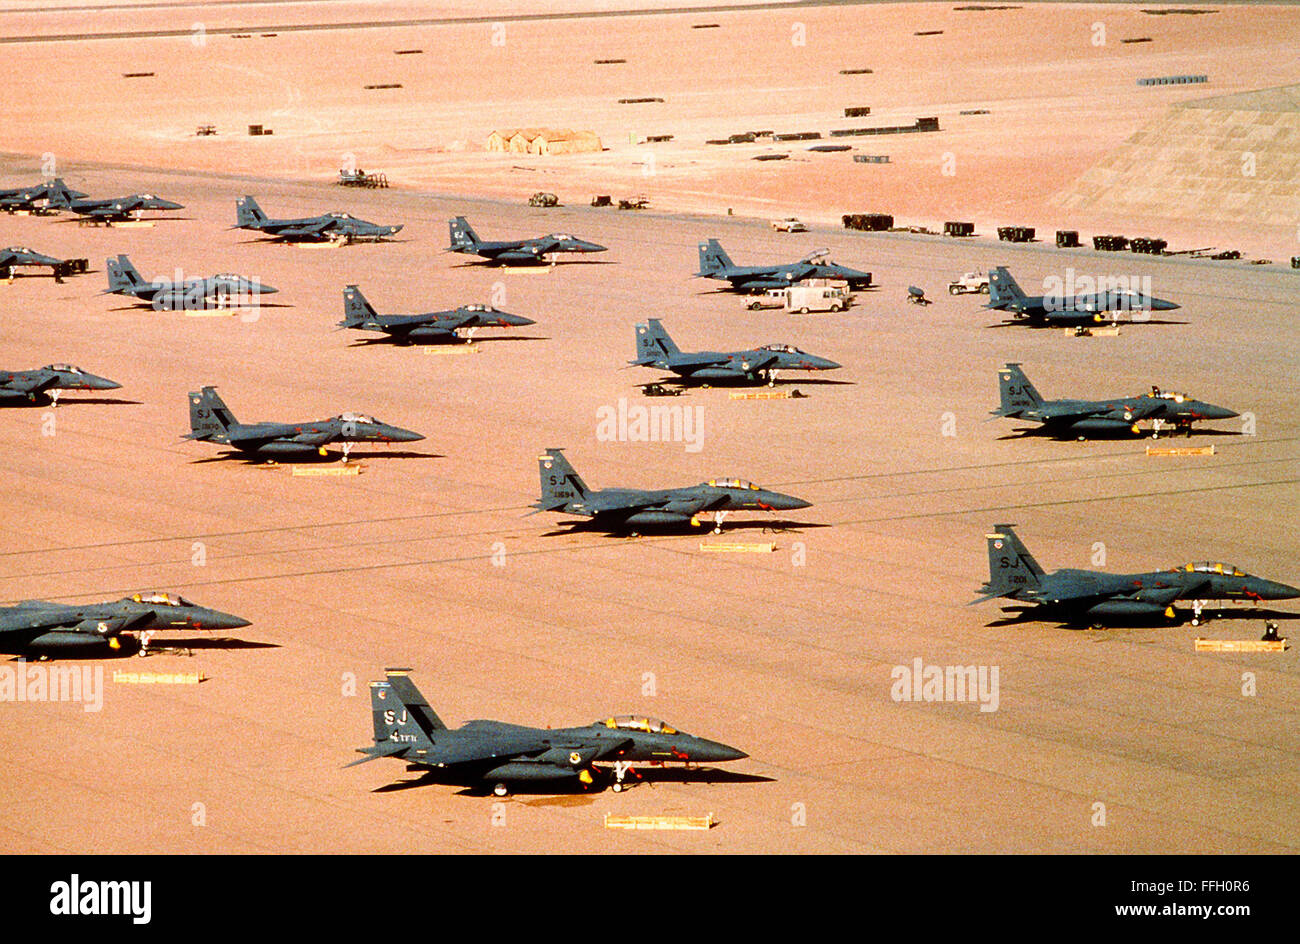 F-15E Eagle fighter aircraft of the 4th Tactical Fighter Wing, Seymour Johnson Air Force Base, N.C., are parked on an air field during Operation Desert Shield.     Deutsch: F-15E Eagle fighter aircraft of the 4th Tactical Fighter Wing, Seymour Johnson Air Force Base, N.C., are parked on an air field during Operation Desert Shield. Stock Photo